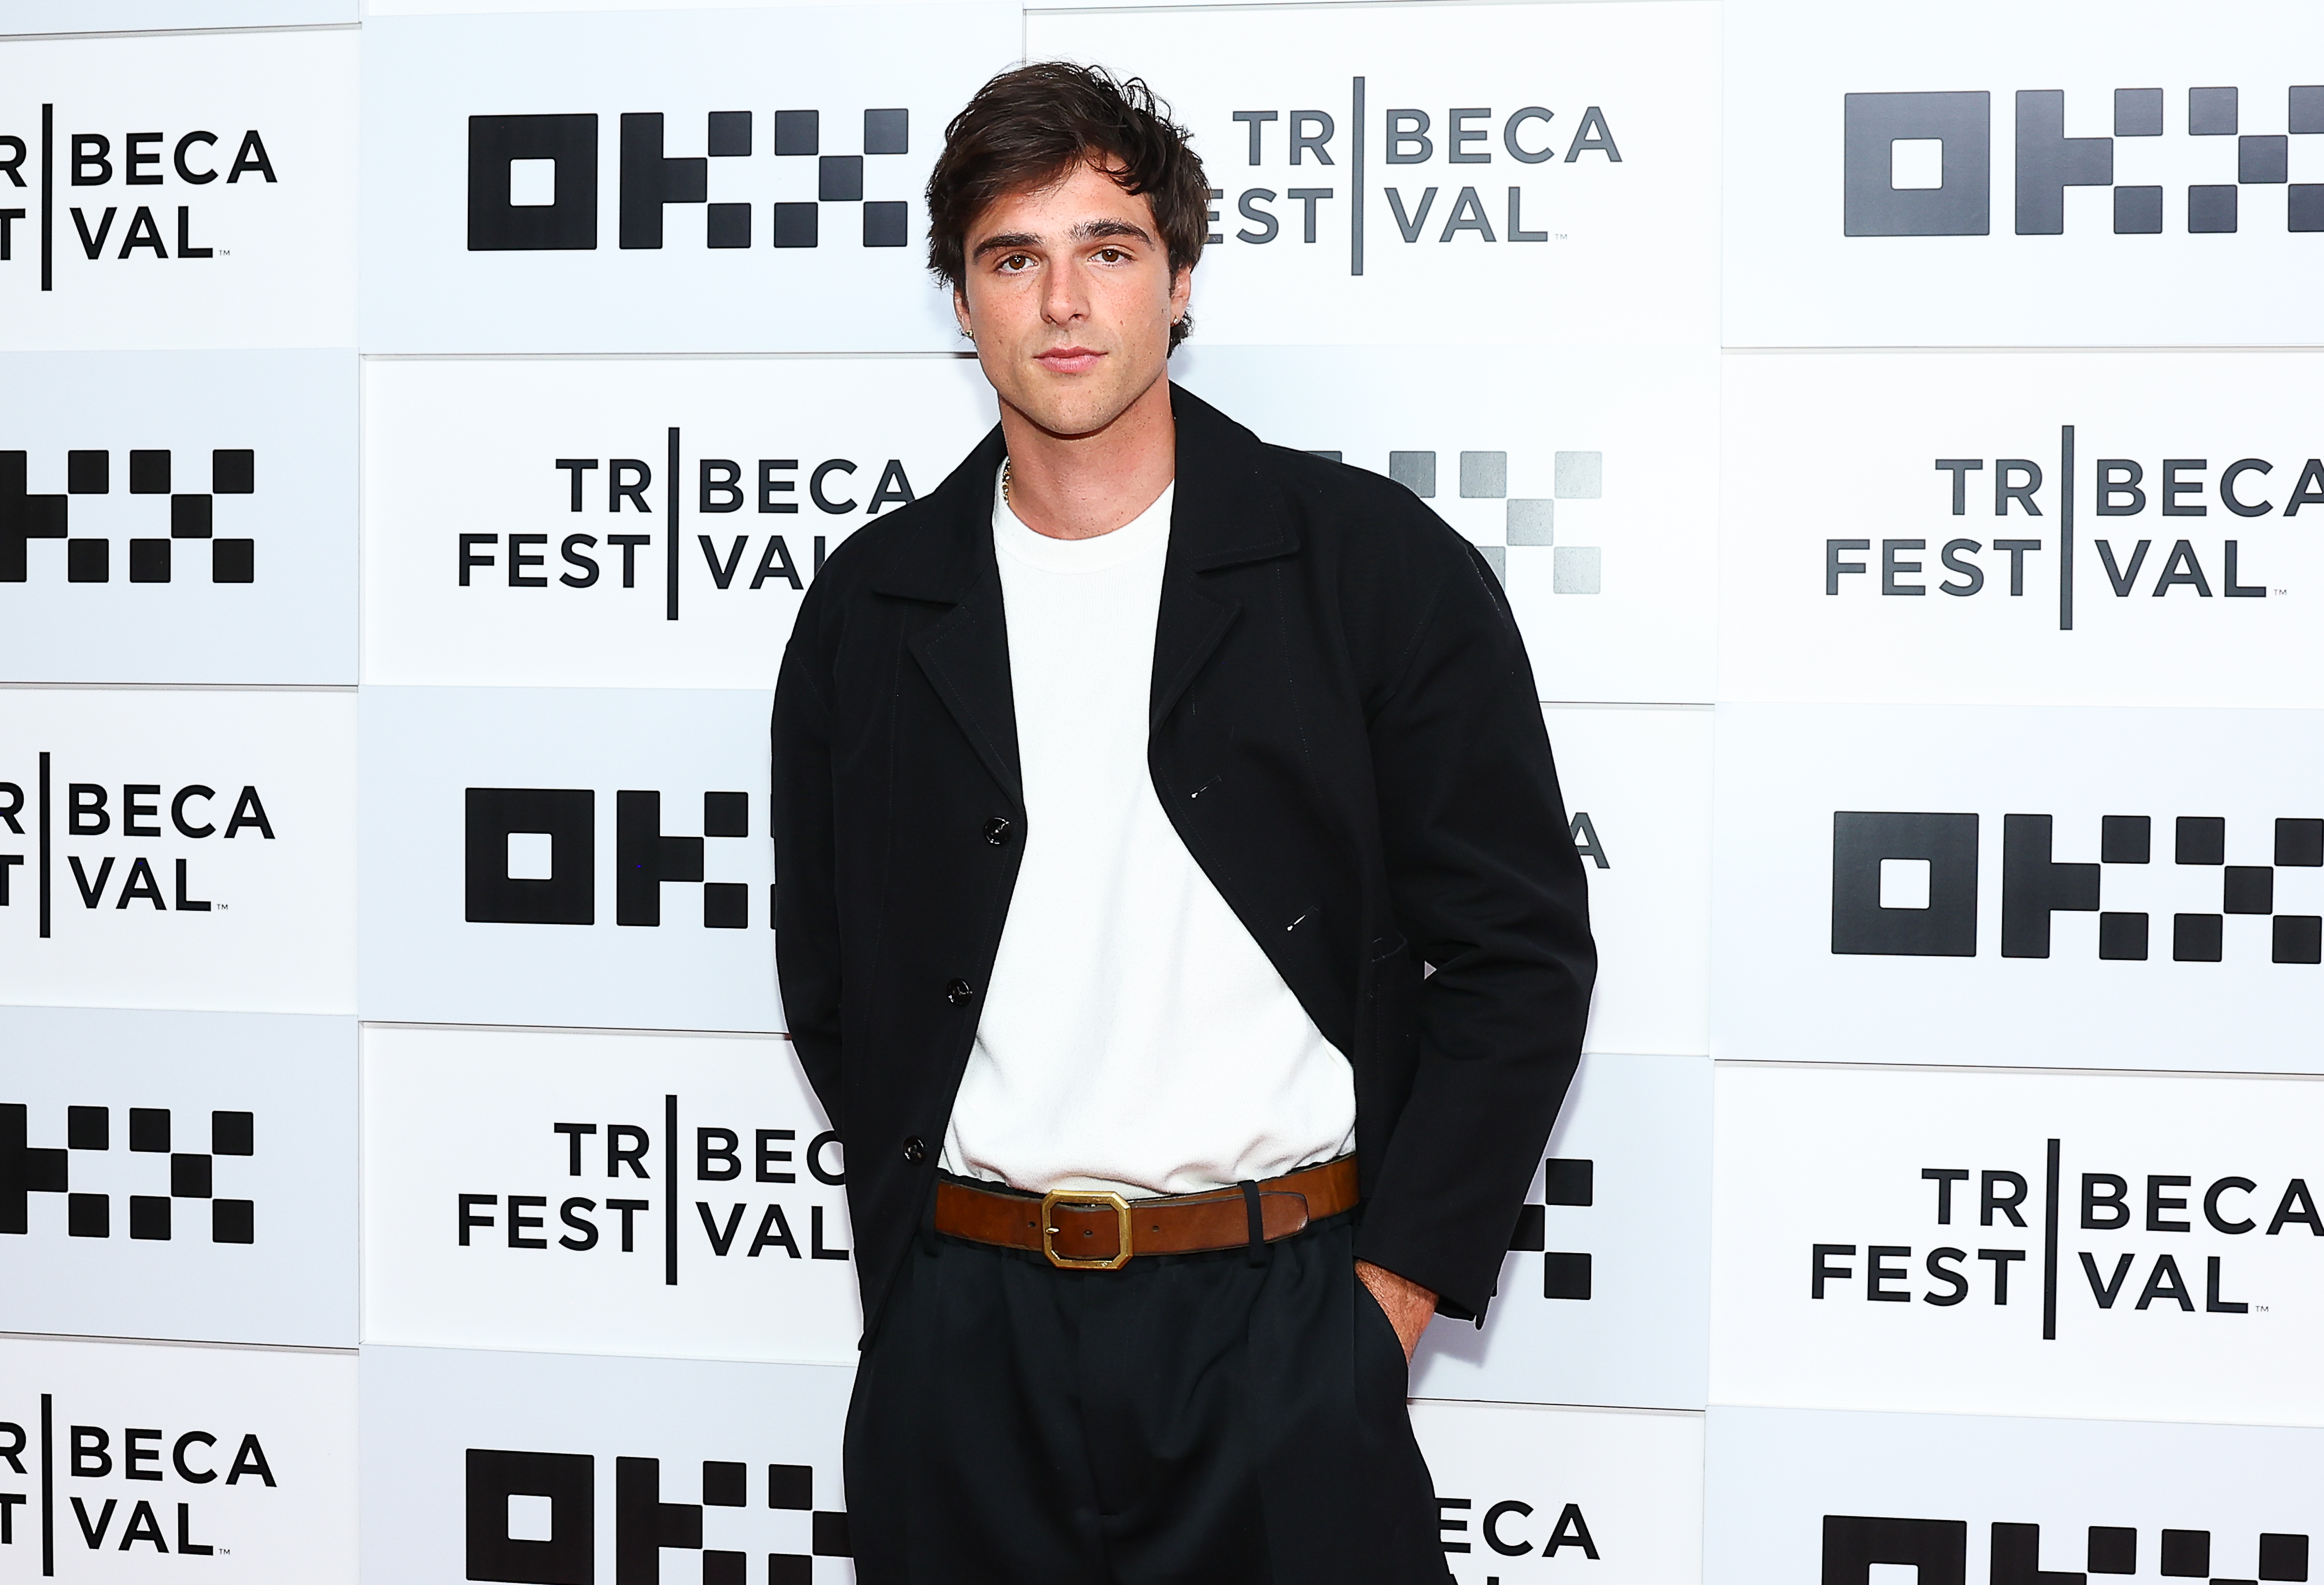 Staying Busy! Jacob Elordi's Roles After 'Kissing Booth': Movie, TV Shows